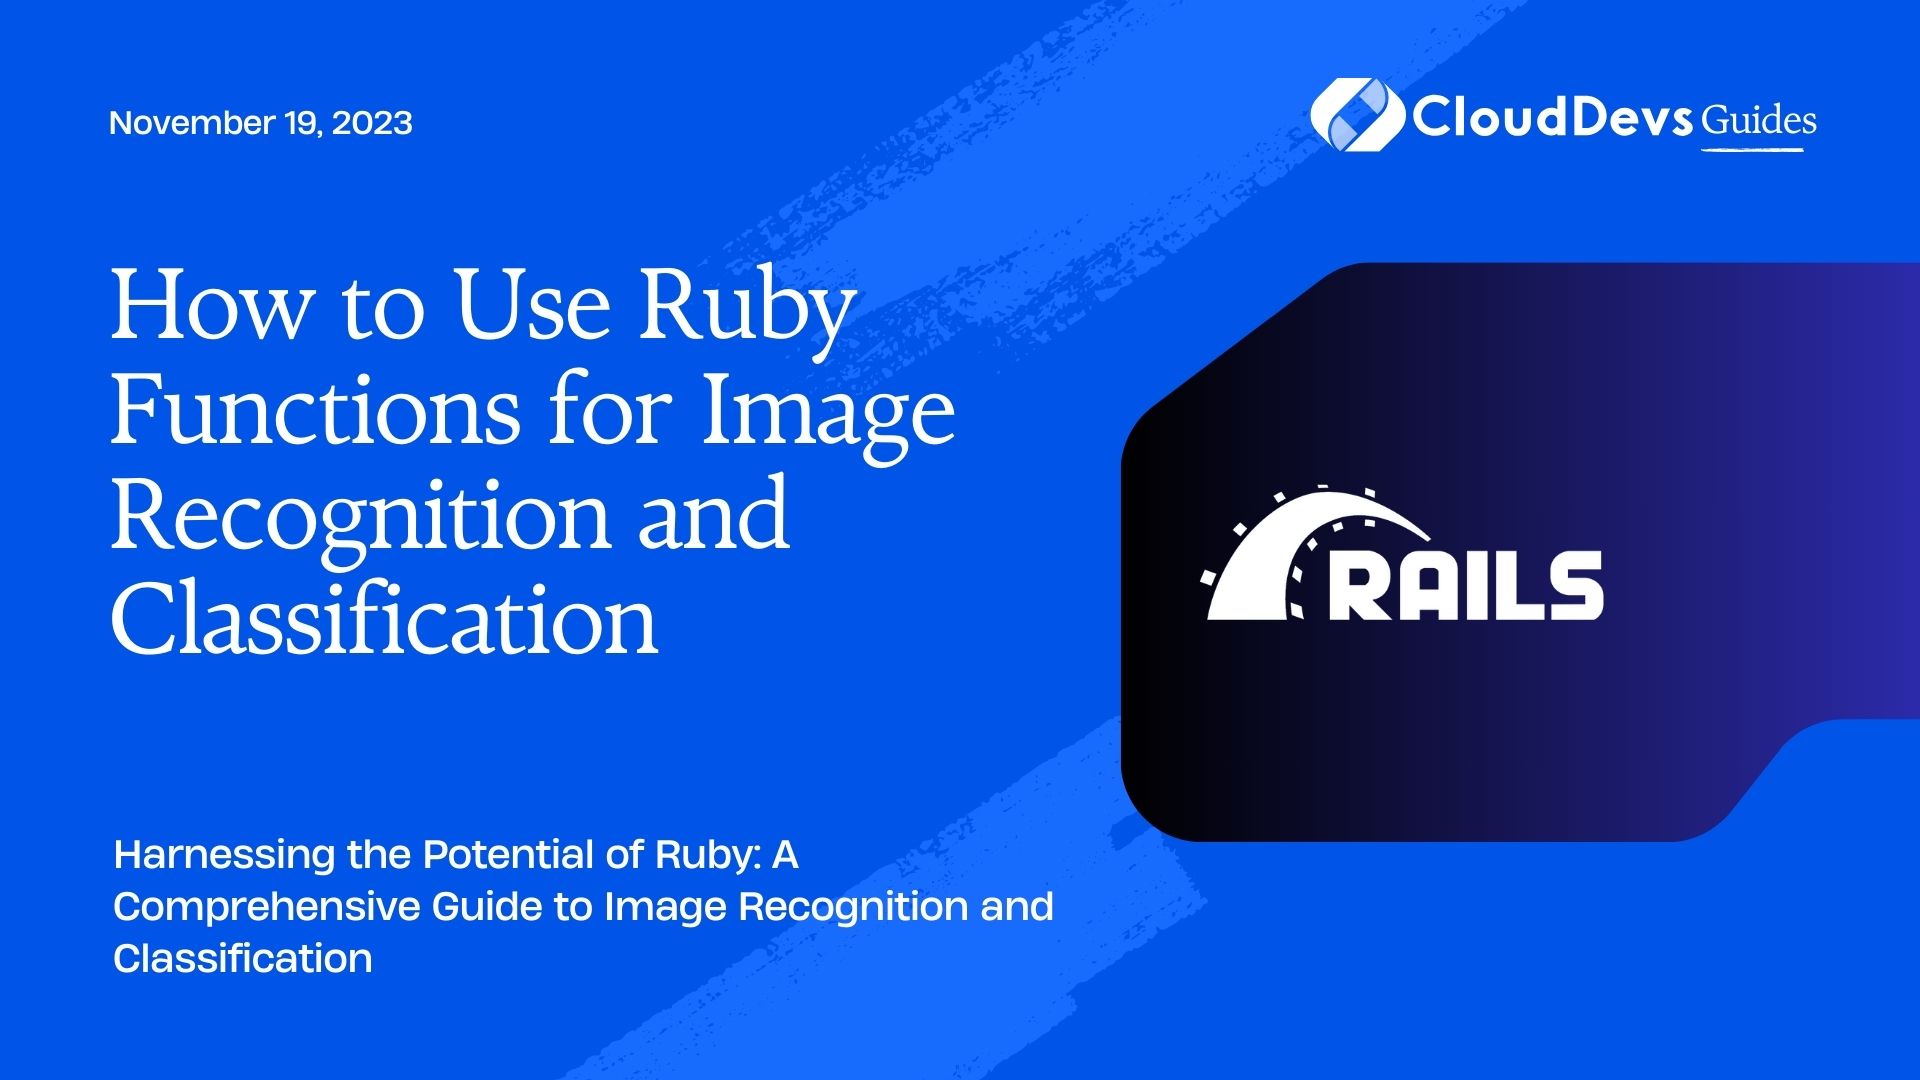 How to Use Ruby Functions for Image Recognition and Classification